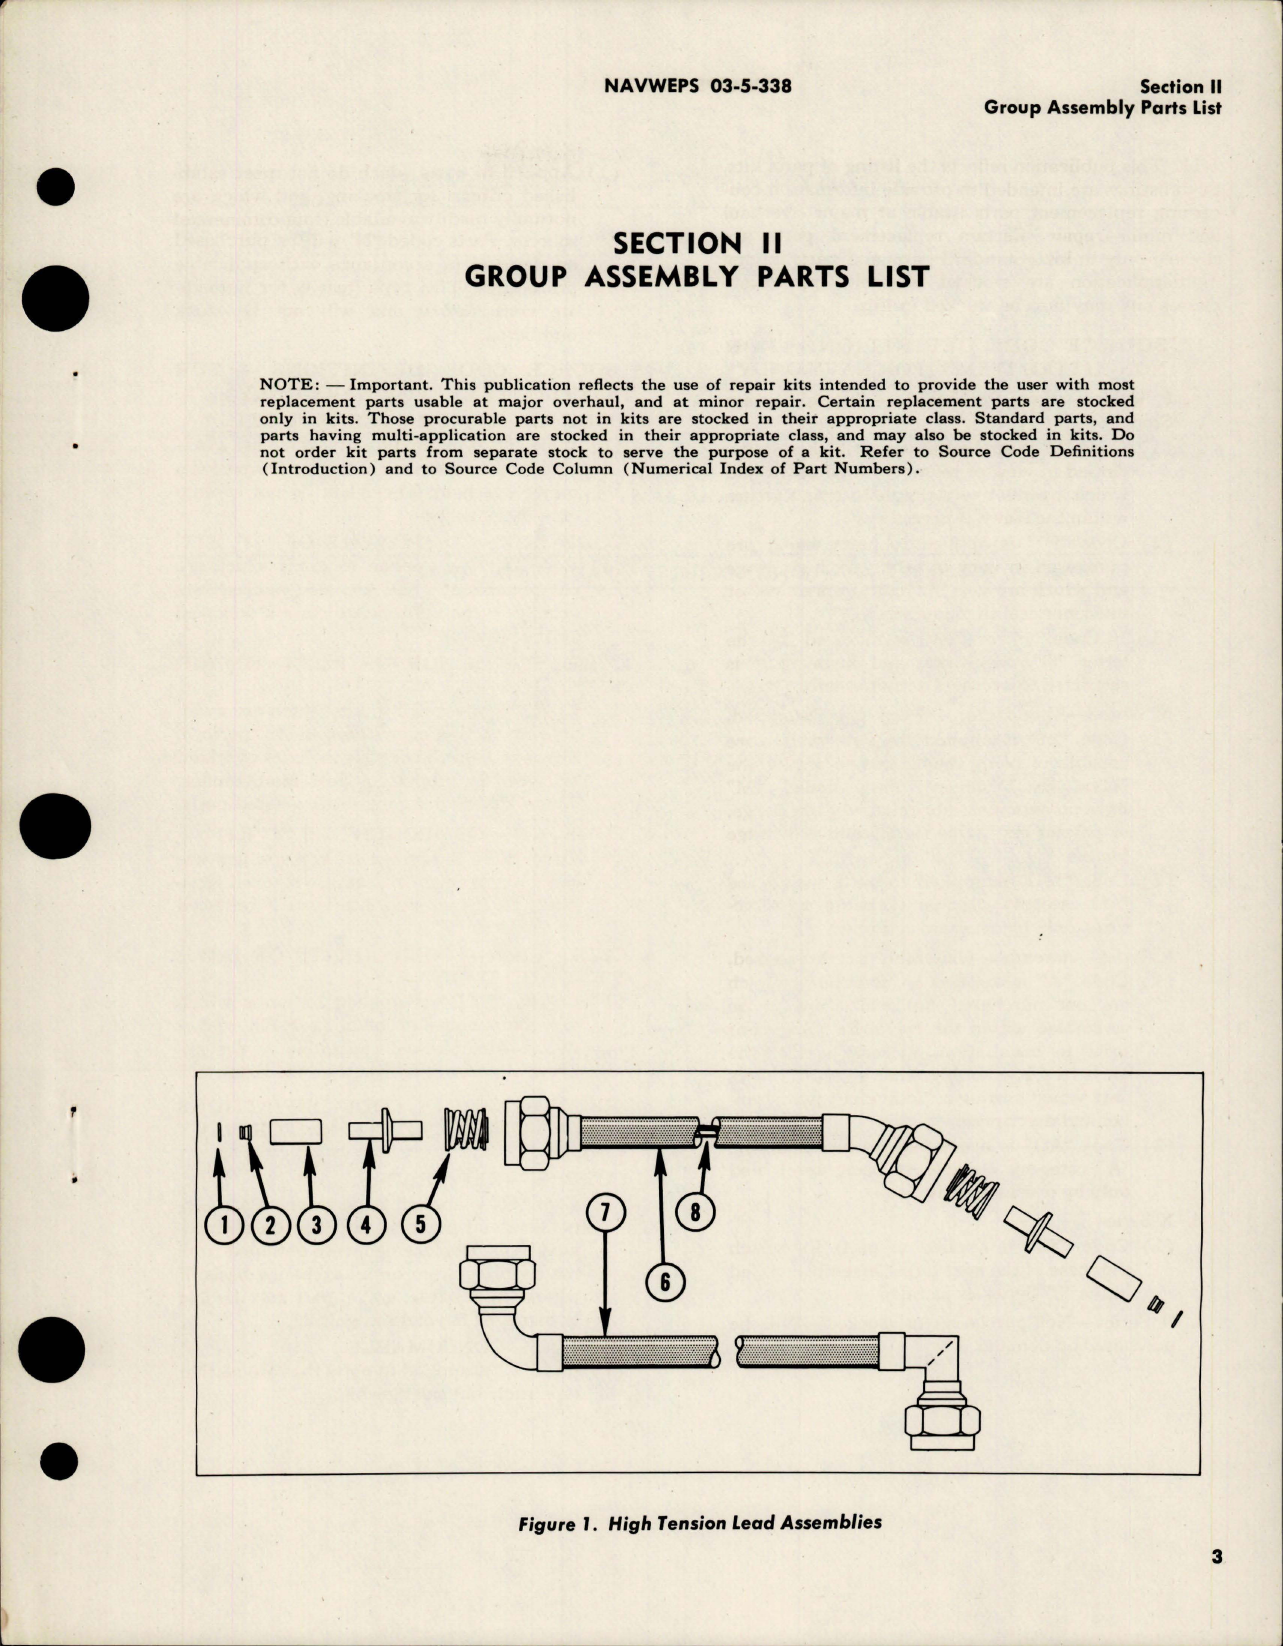 Sample page 5 from AirCorps Library document: Illustrated Parts Breakdown for Ignition Leads and Wiring Harnesses 